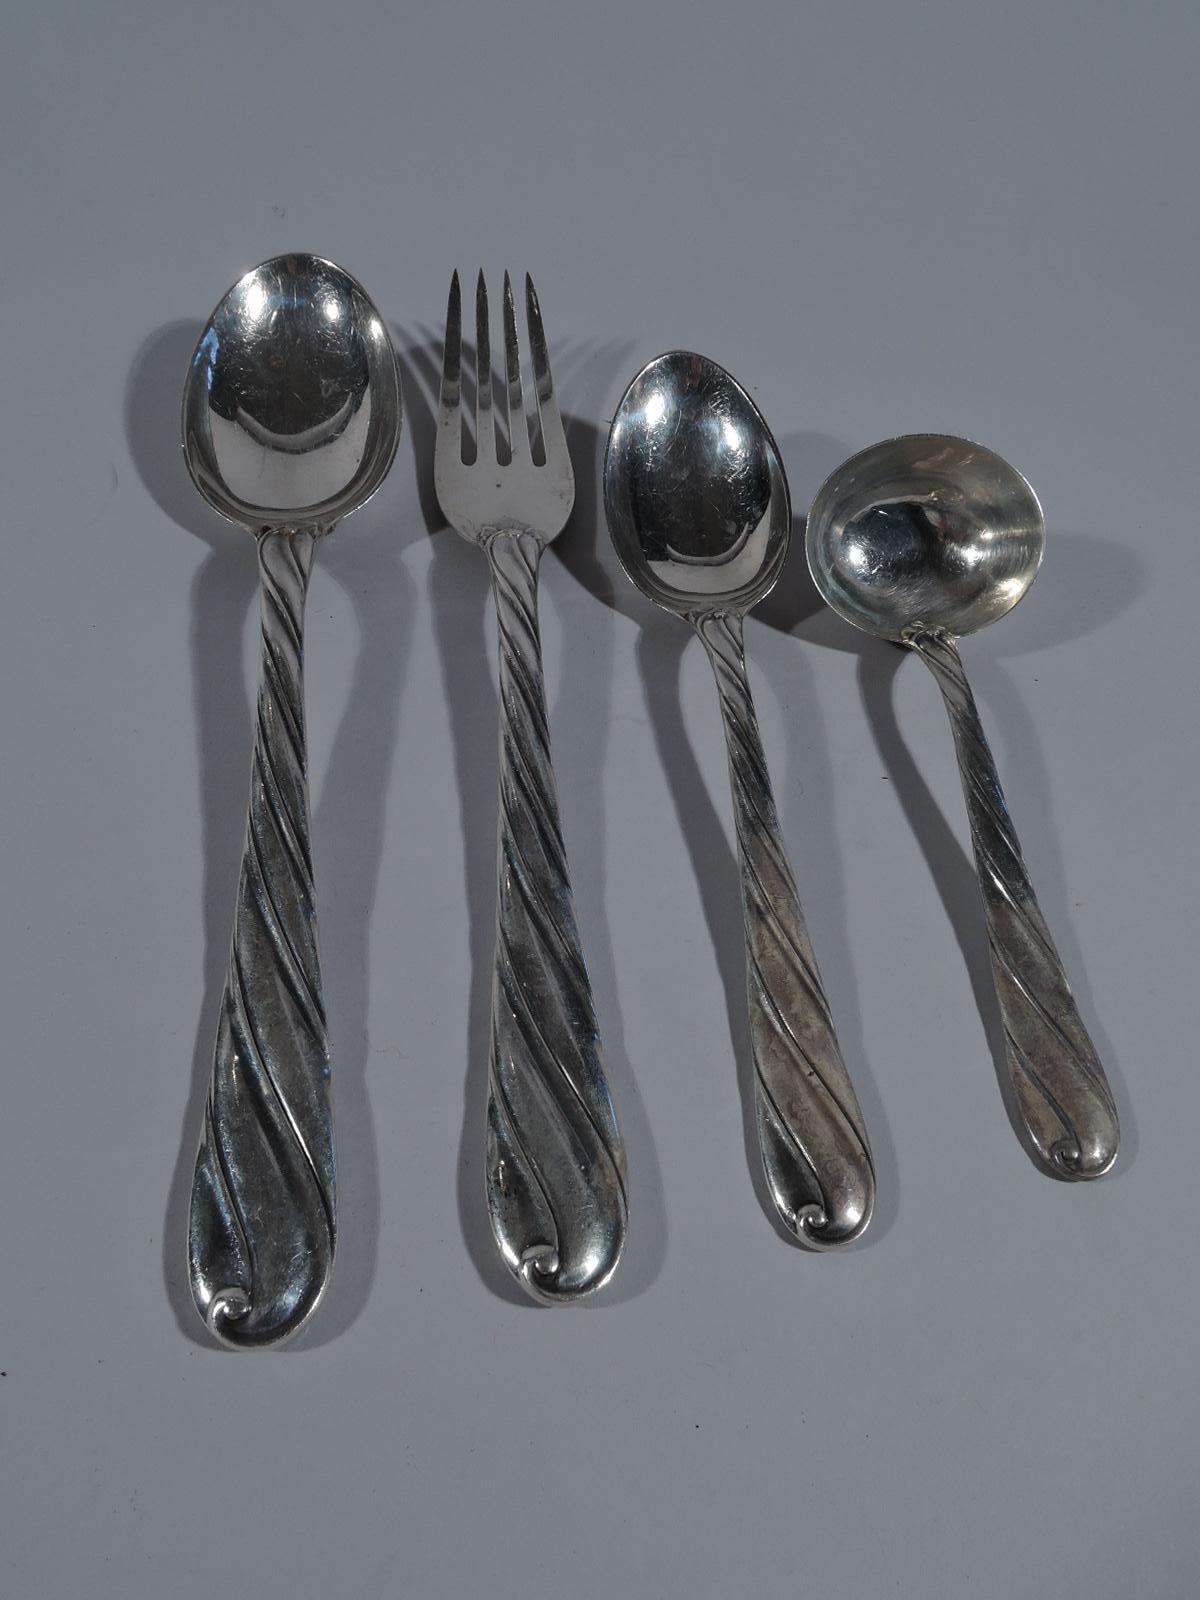 Torchon sterling silver dinner set for twelve. Made by Buccellat in Italy. This set comprises 88 pieces (dimensions in inches): Forks: 12 dinner forks (8 5/16) and 12 salad forks (7); spoons: 12 oval soup spoons (6 7/8) and 24 teaspoons (5 3/4);